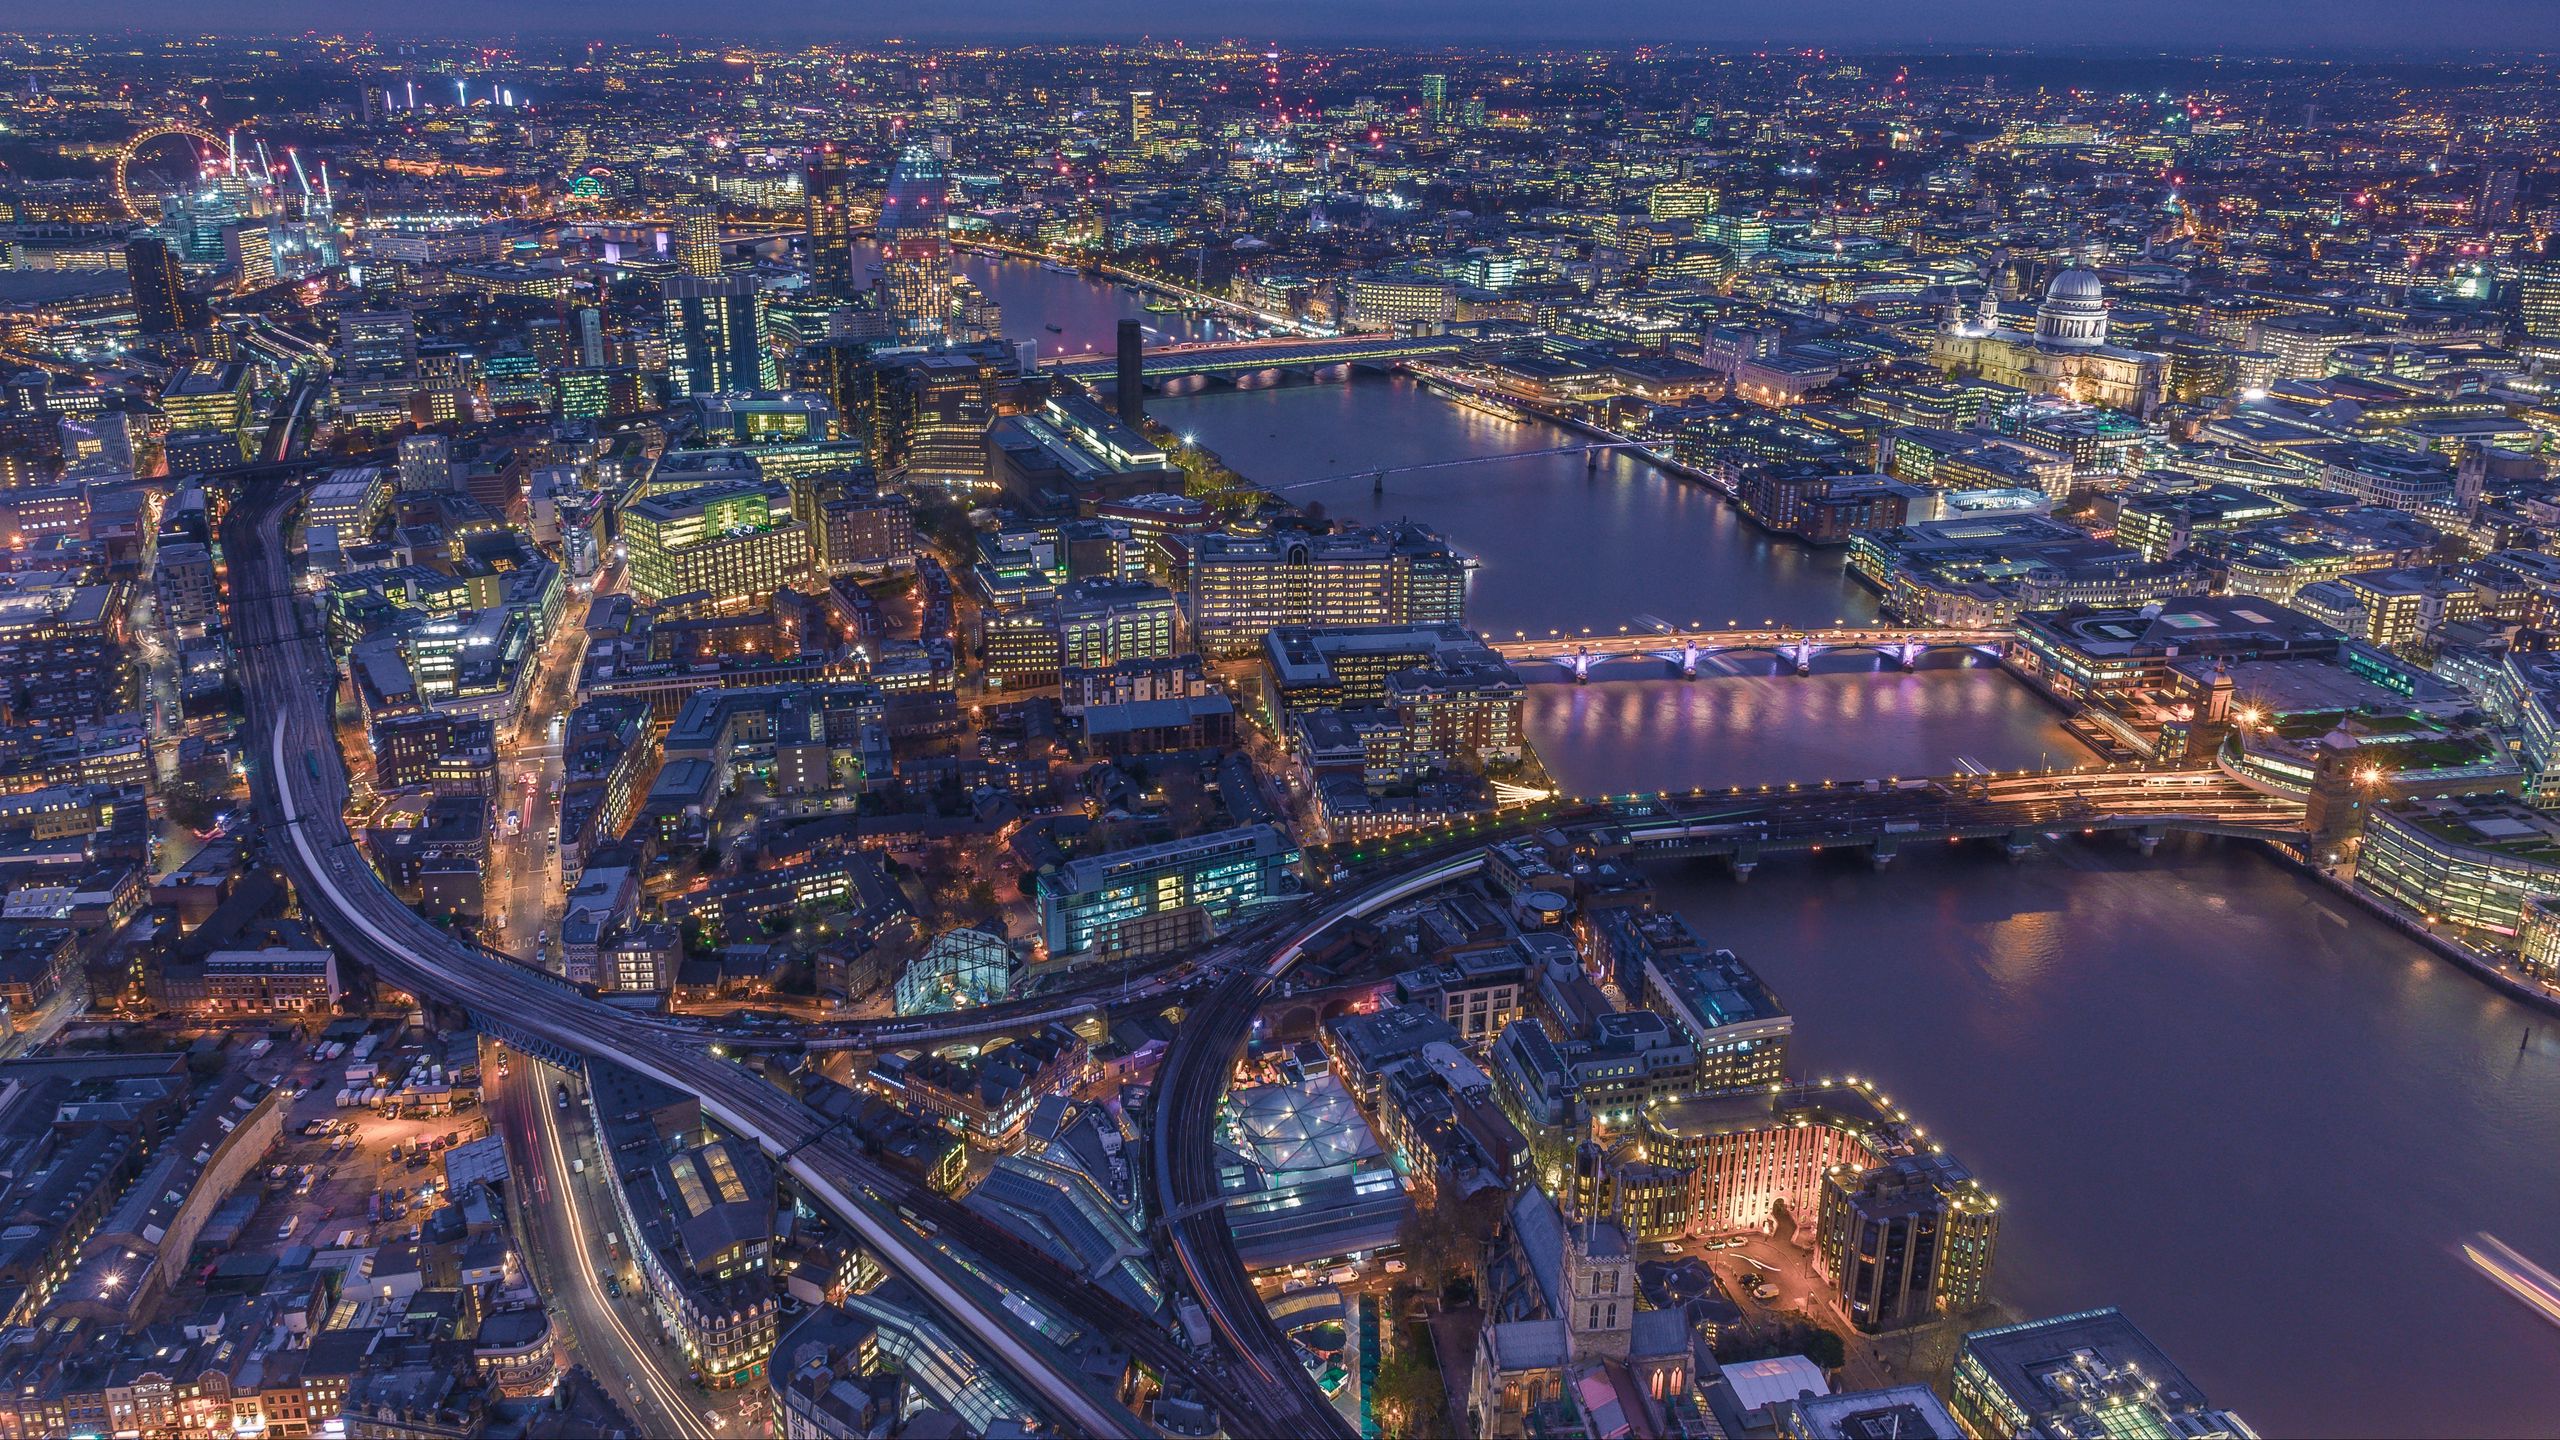 Download wallpaper 2560x1440 london, united kingdom, night city, top view  widescreen 16:9 hd background